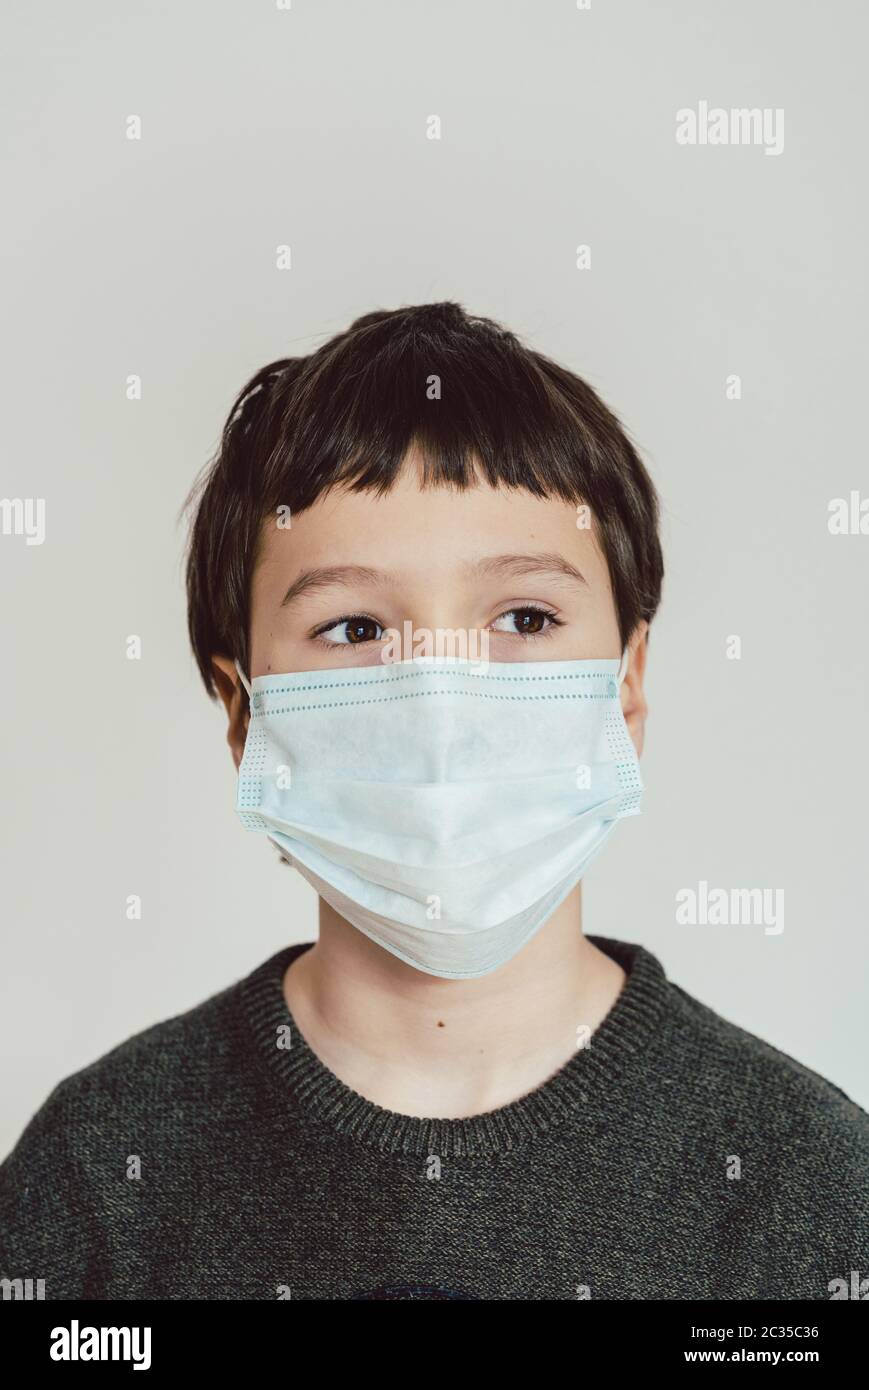 Young boy wearing face mask during Covid-19 crisis staying at home Stock Photo